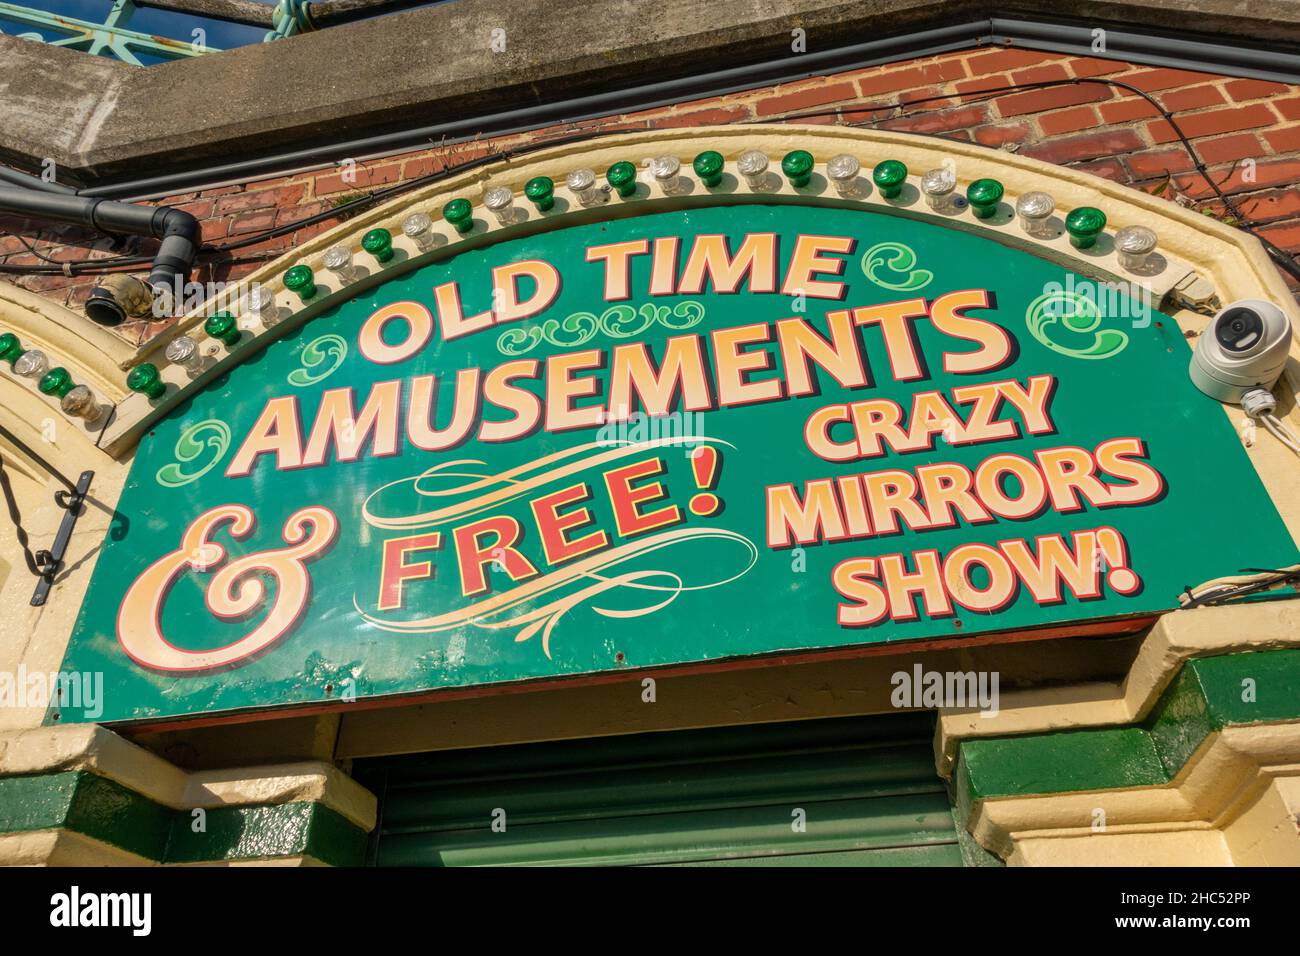 Colourful Old Time Amusements entrance sign the seafront on Brighton beach, Brighton, East Sussex, UK. Stock Photo